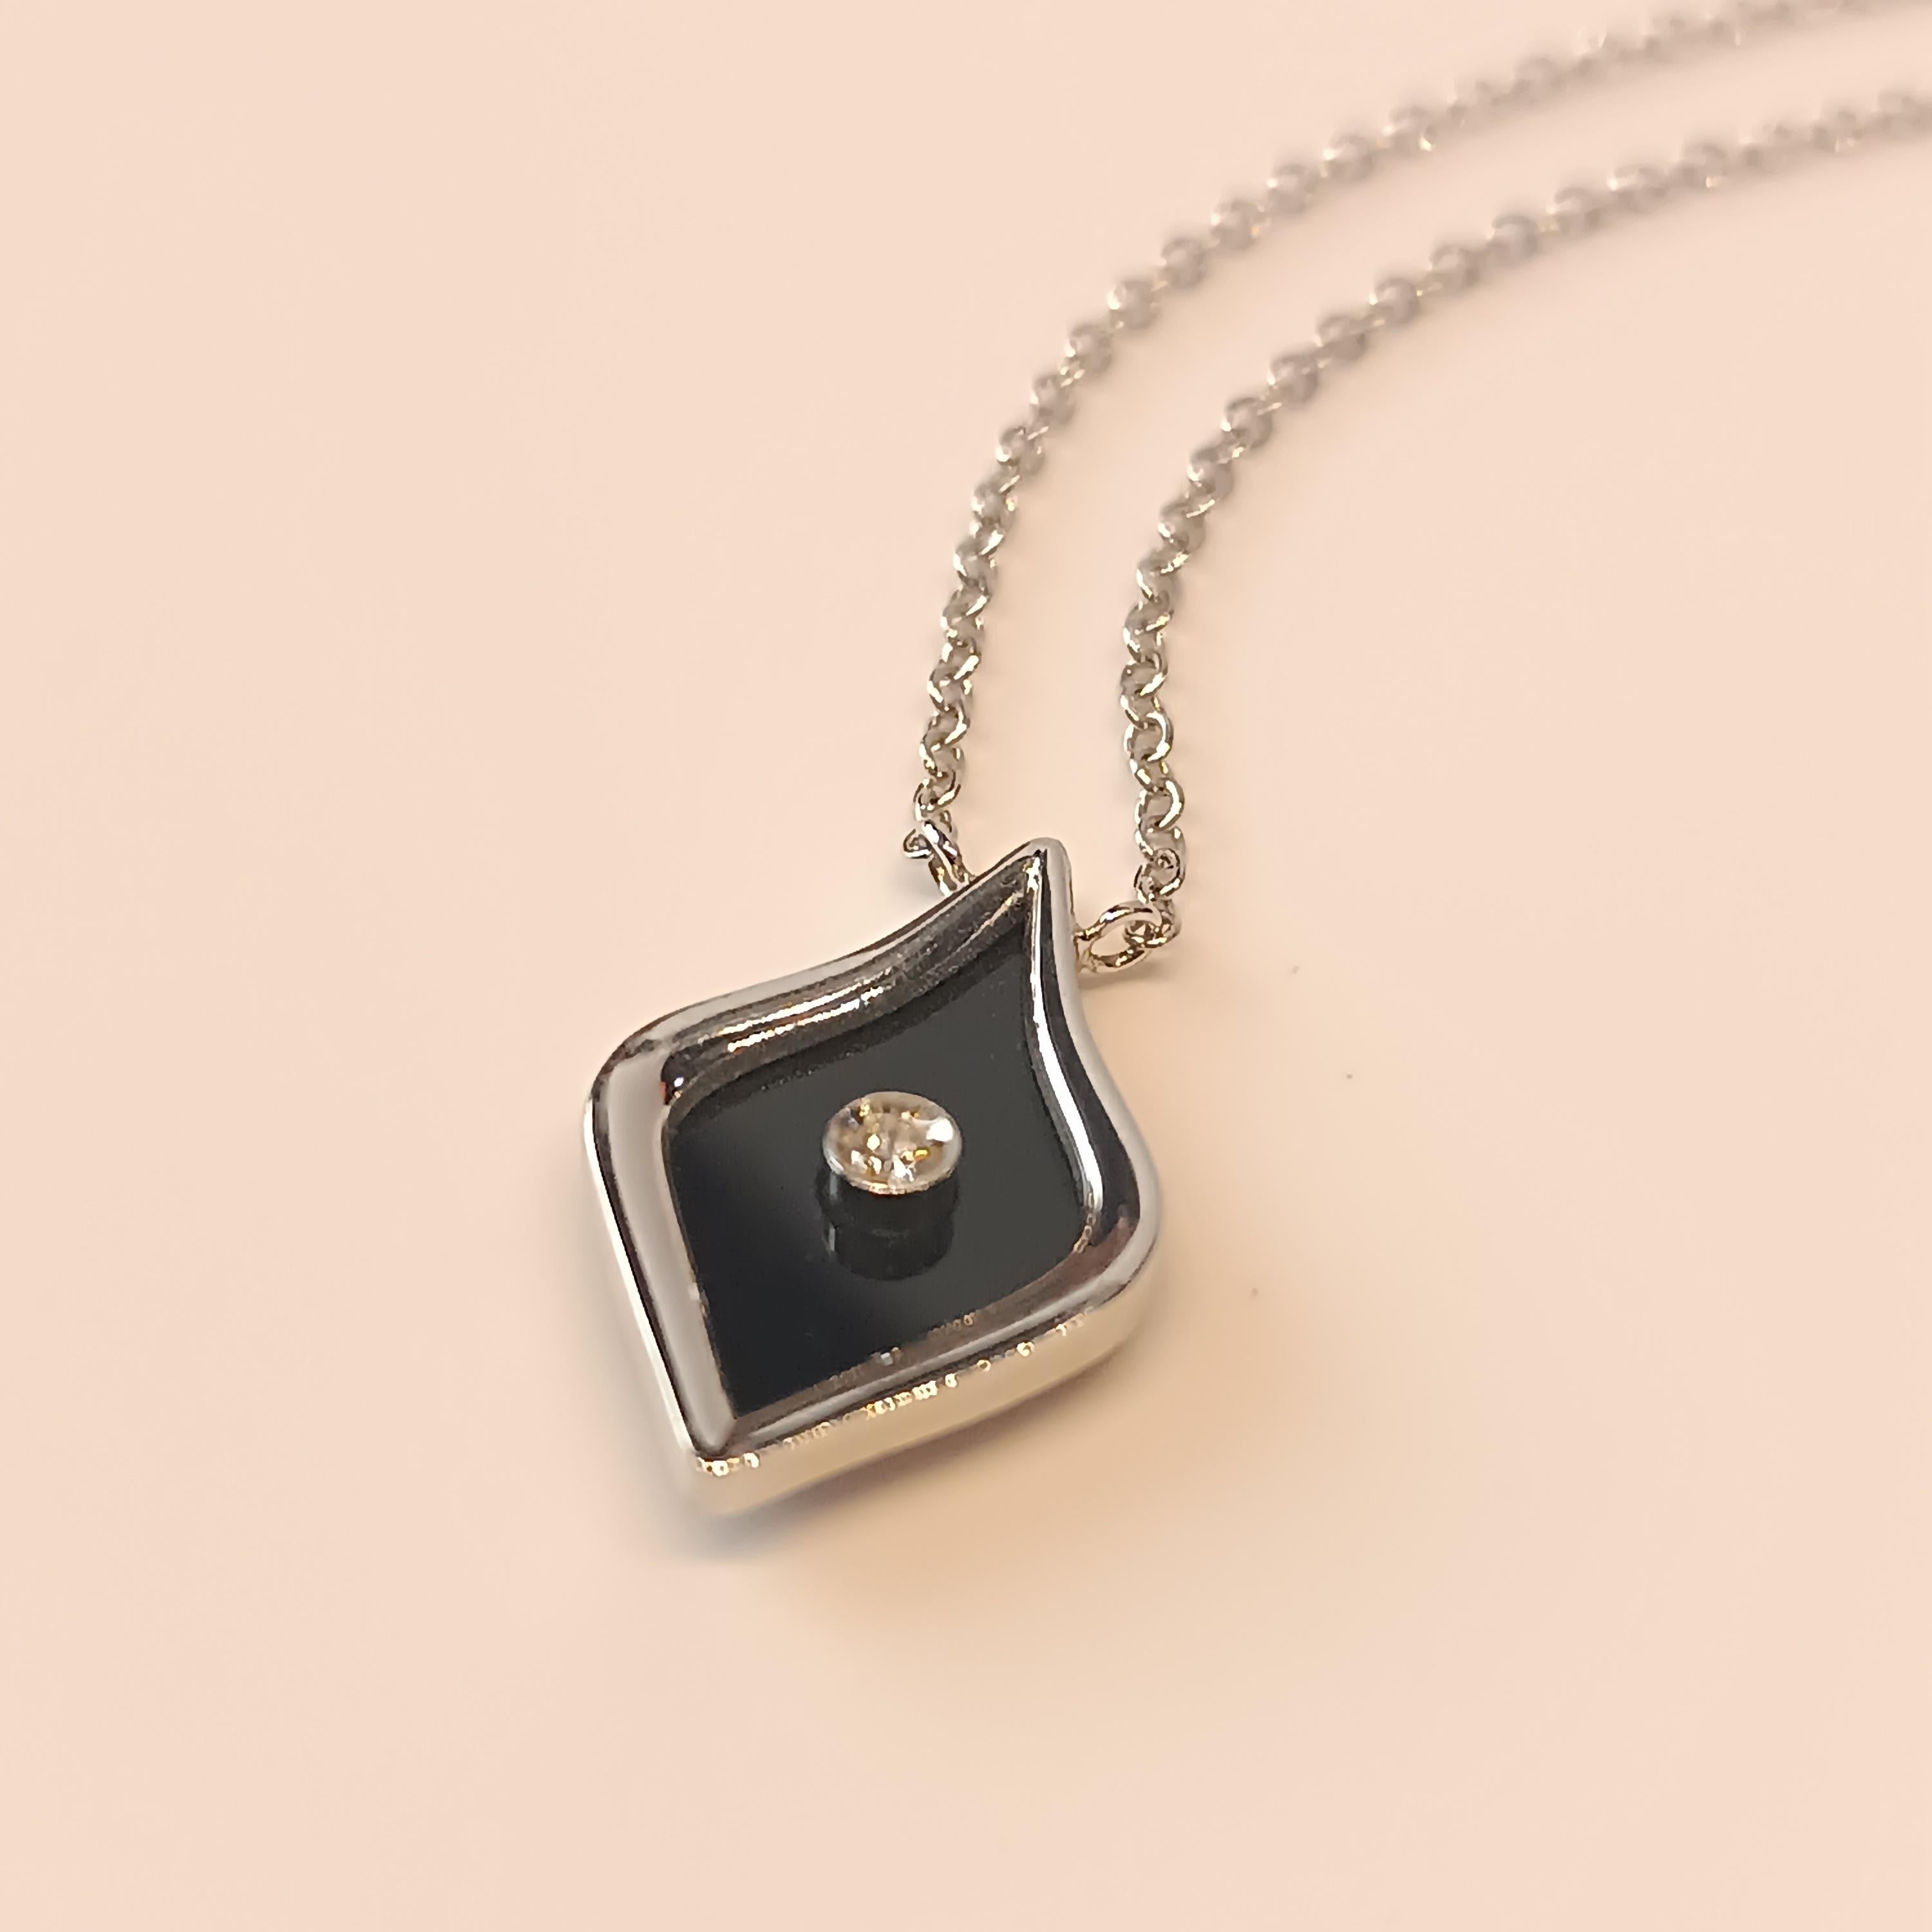 This wonderful Leo Milano pendant from our Olmetto collection shows in every detail a very complicate yet perfectly done workmanship. The pendant and the chain are in 18 white gold with onyx . The object weights 4.74 grams the  diamonds 0.3 carats.